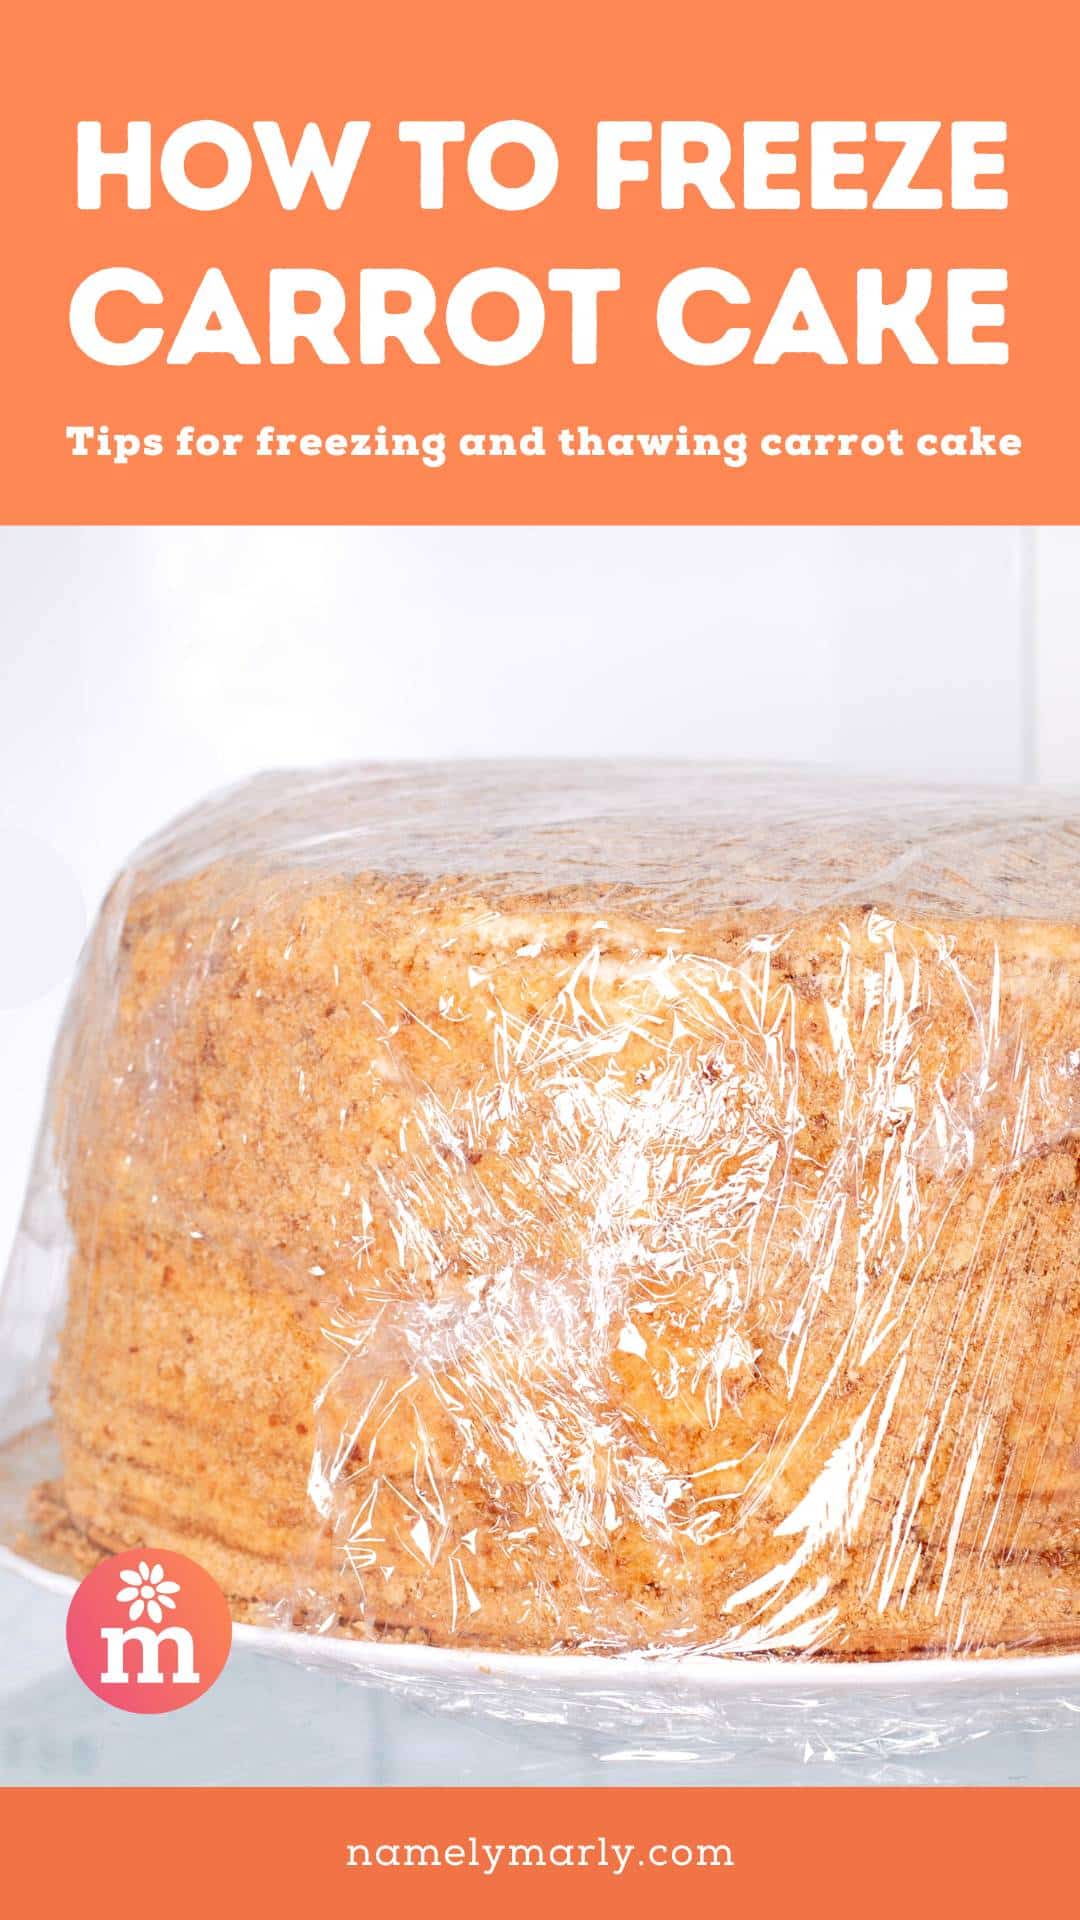 Round cakes are wrapped in plastic and stored in a freezer. The text above it reads, How to Freeze Carrot Cake. Tips for freezing and thawing carrot cake.